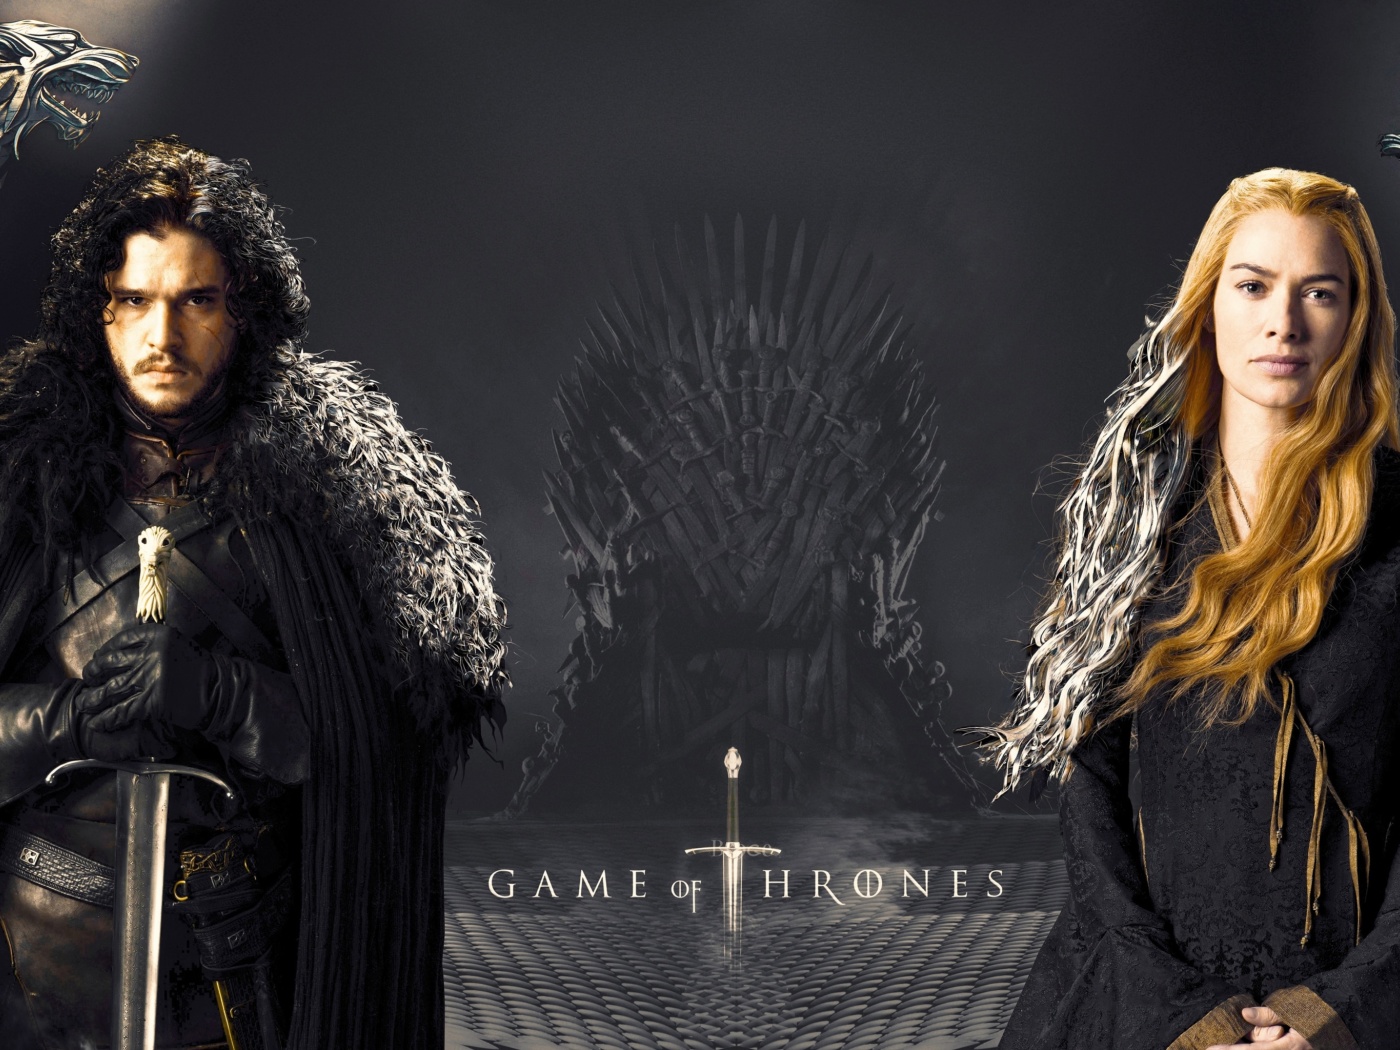 Game Of Thrones actors Jon Snow and Cersei Lannister wallpaper 1400x1050